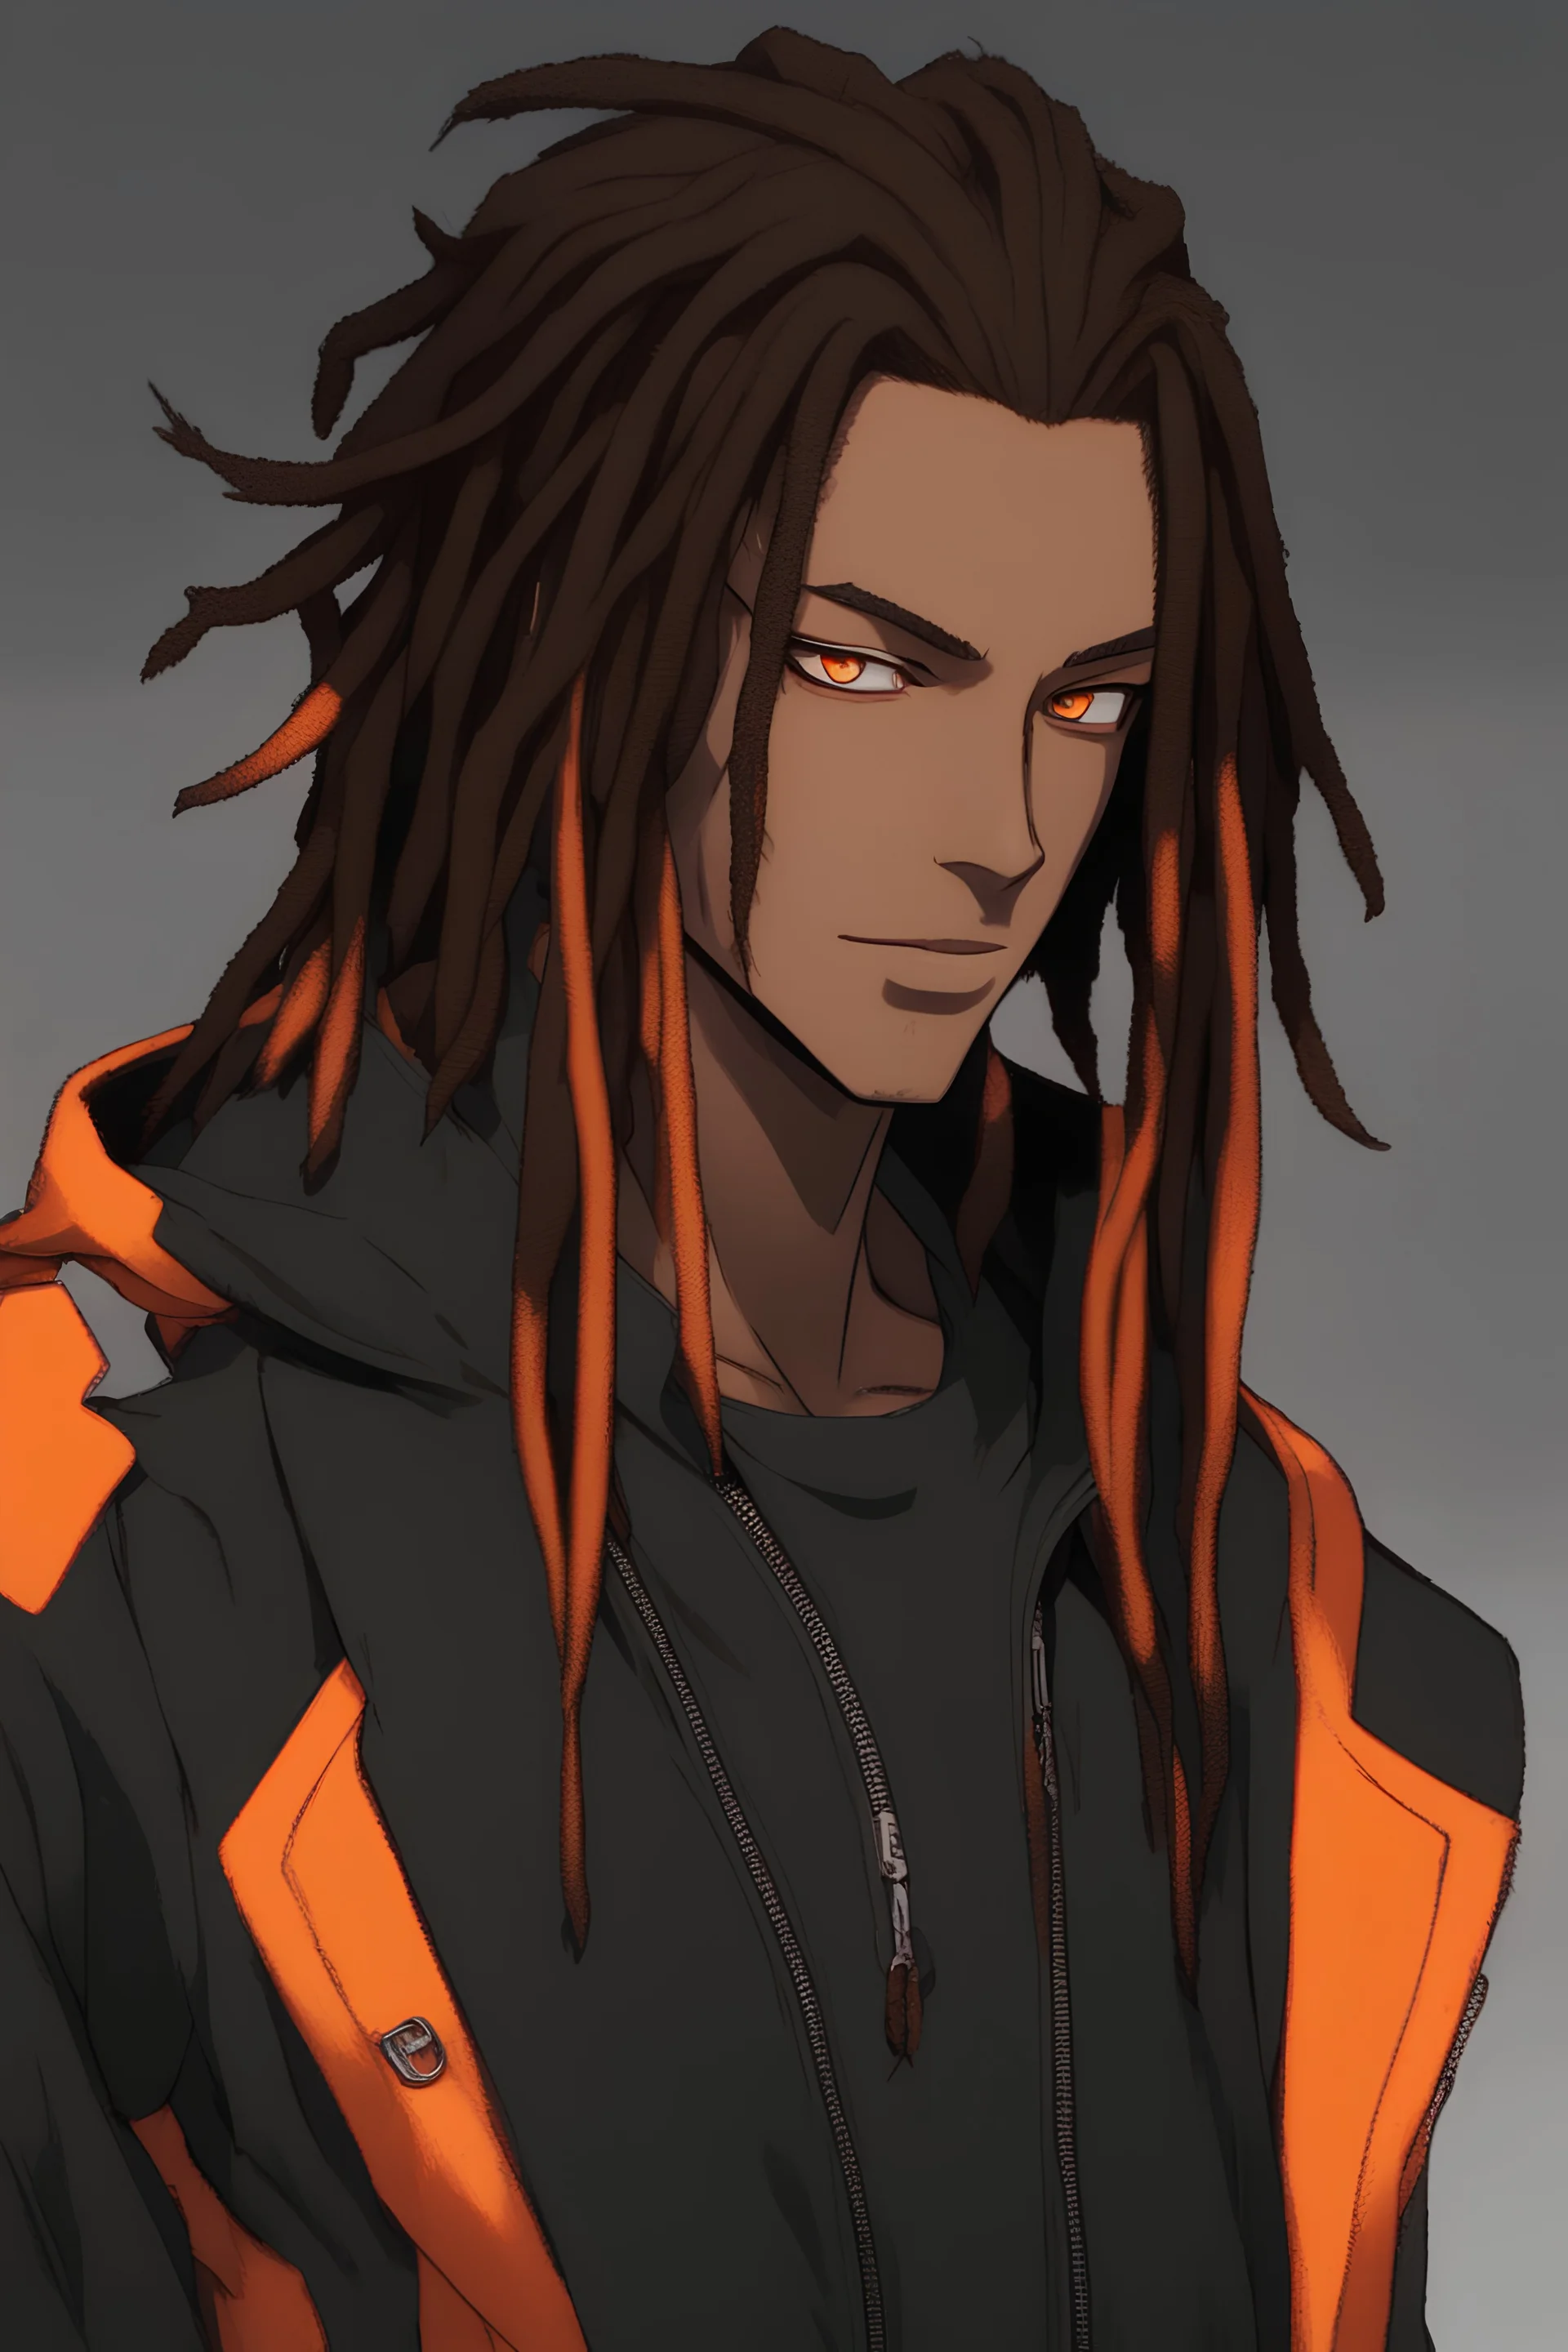 prompthunt: Man with green dreads, Anime, street fashion,